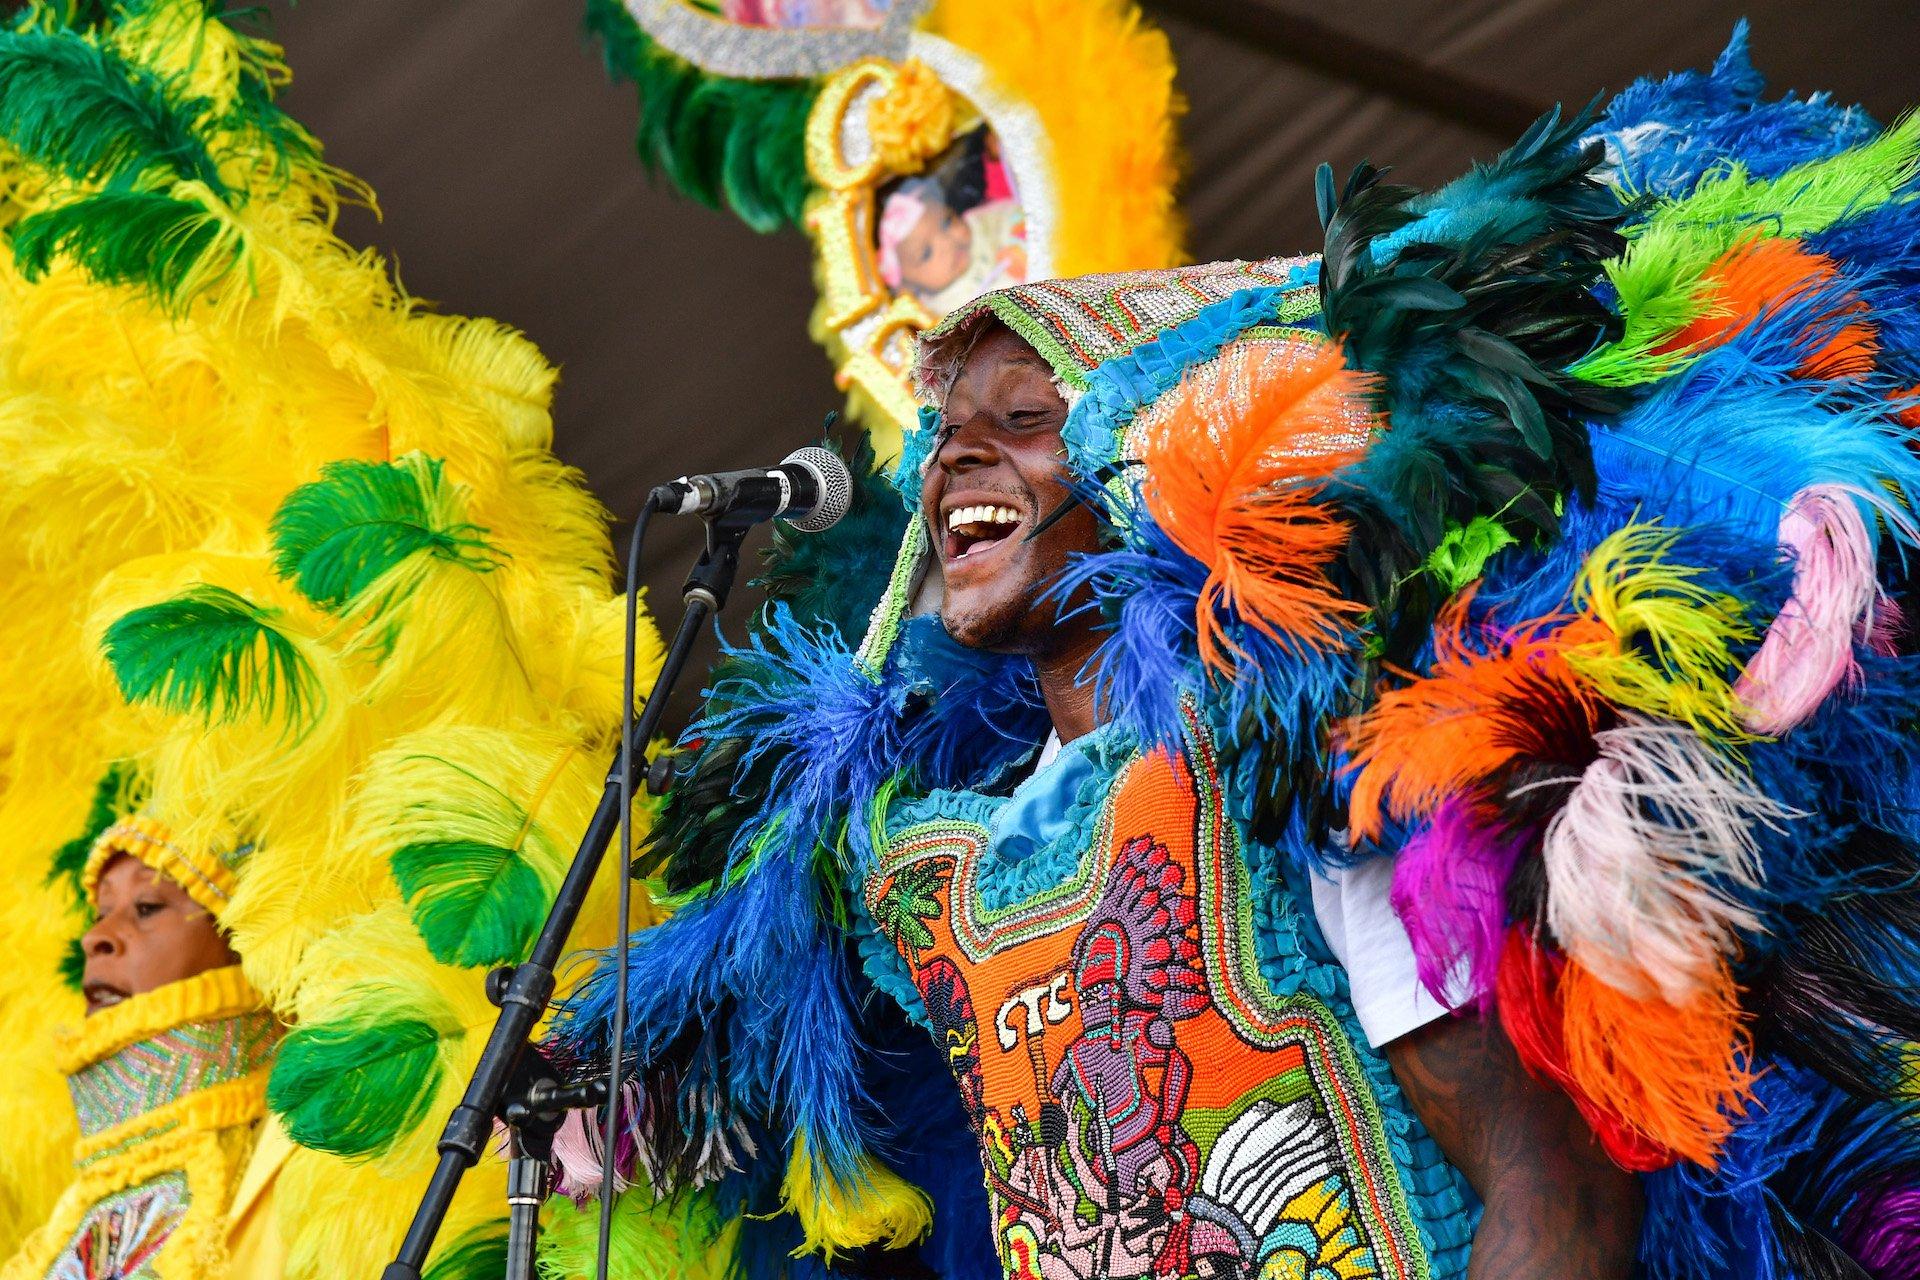 Photo of The Wild Magnolias Mardi Gras Indians performing during the 2019 New Orleans Jazz & Heritage Festival